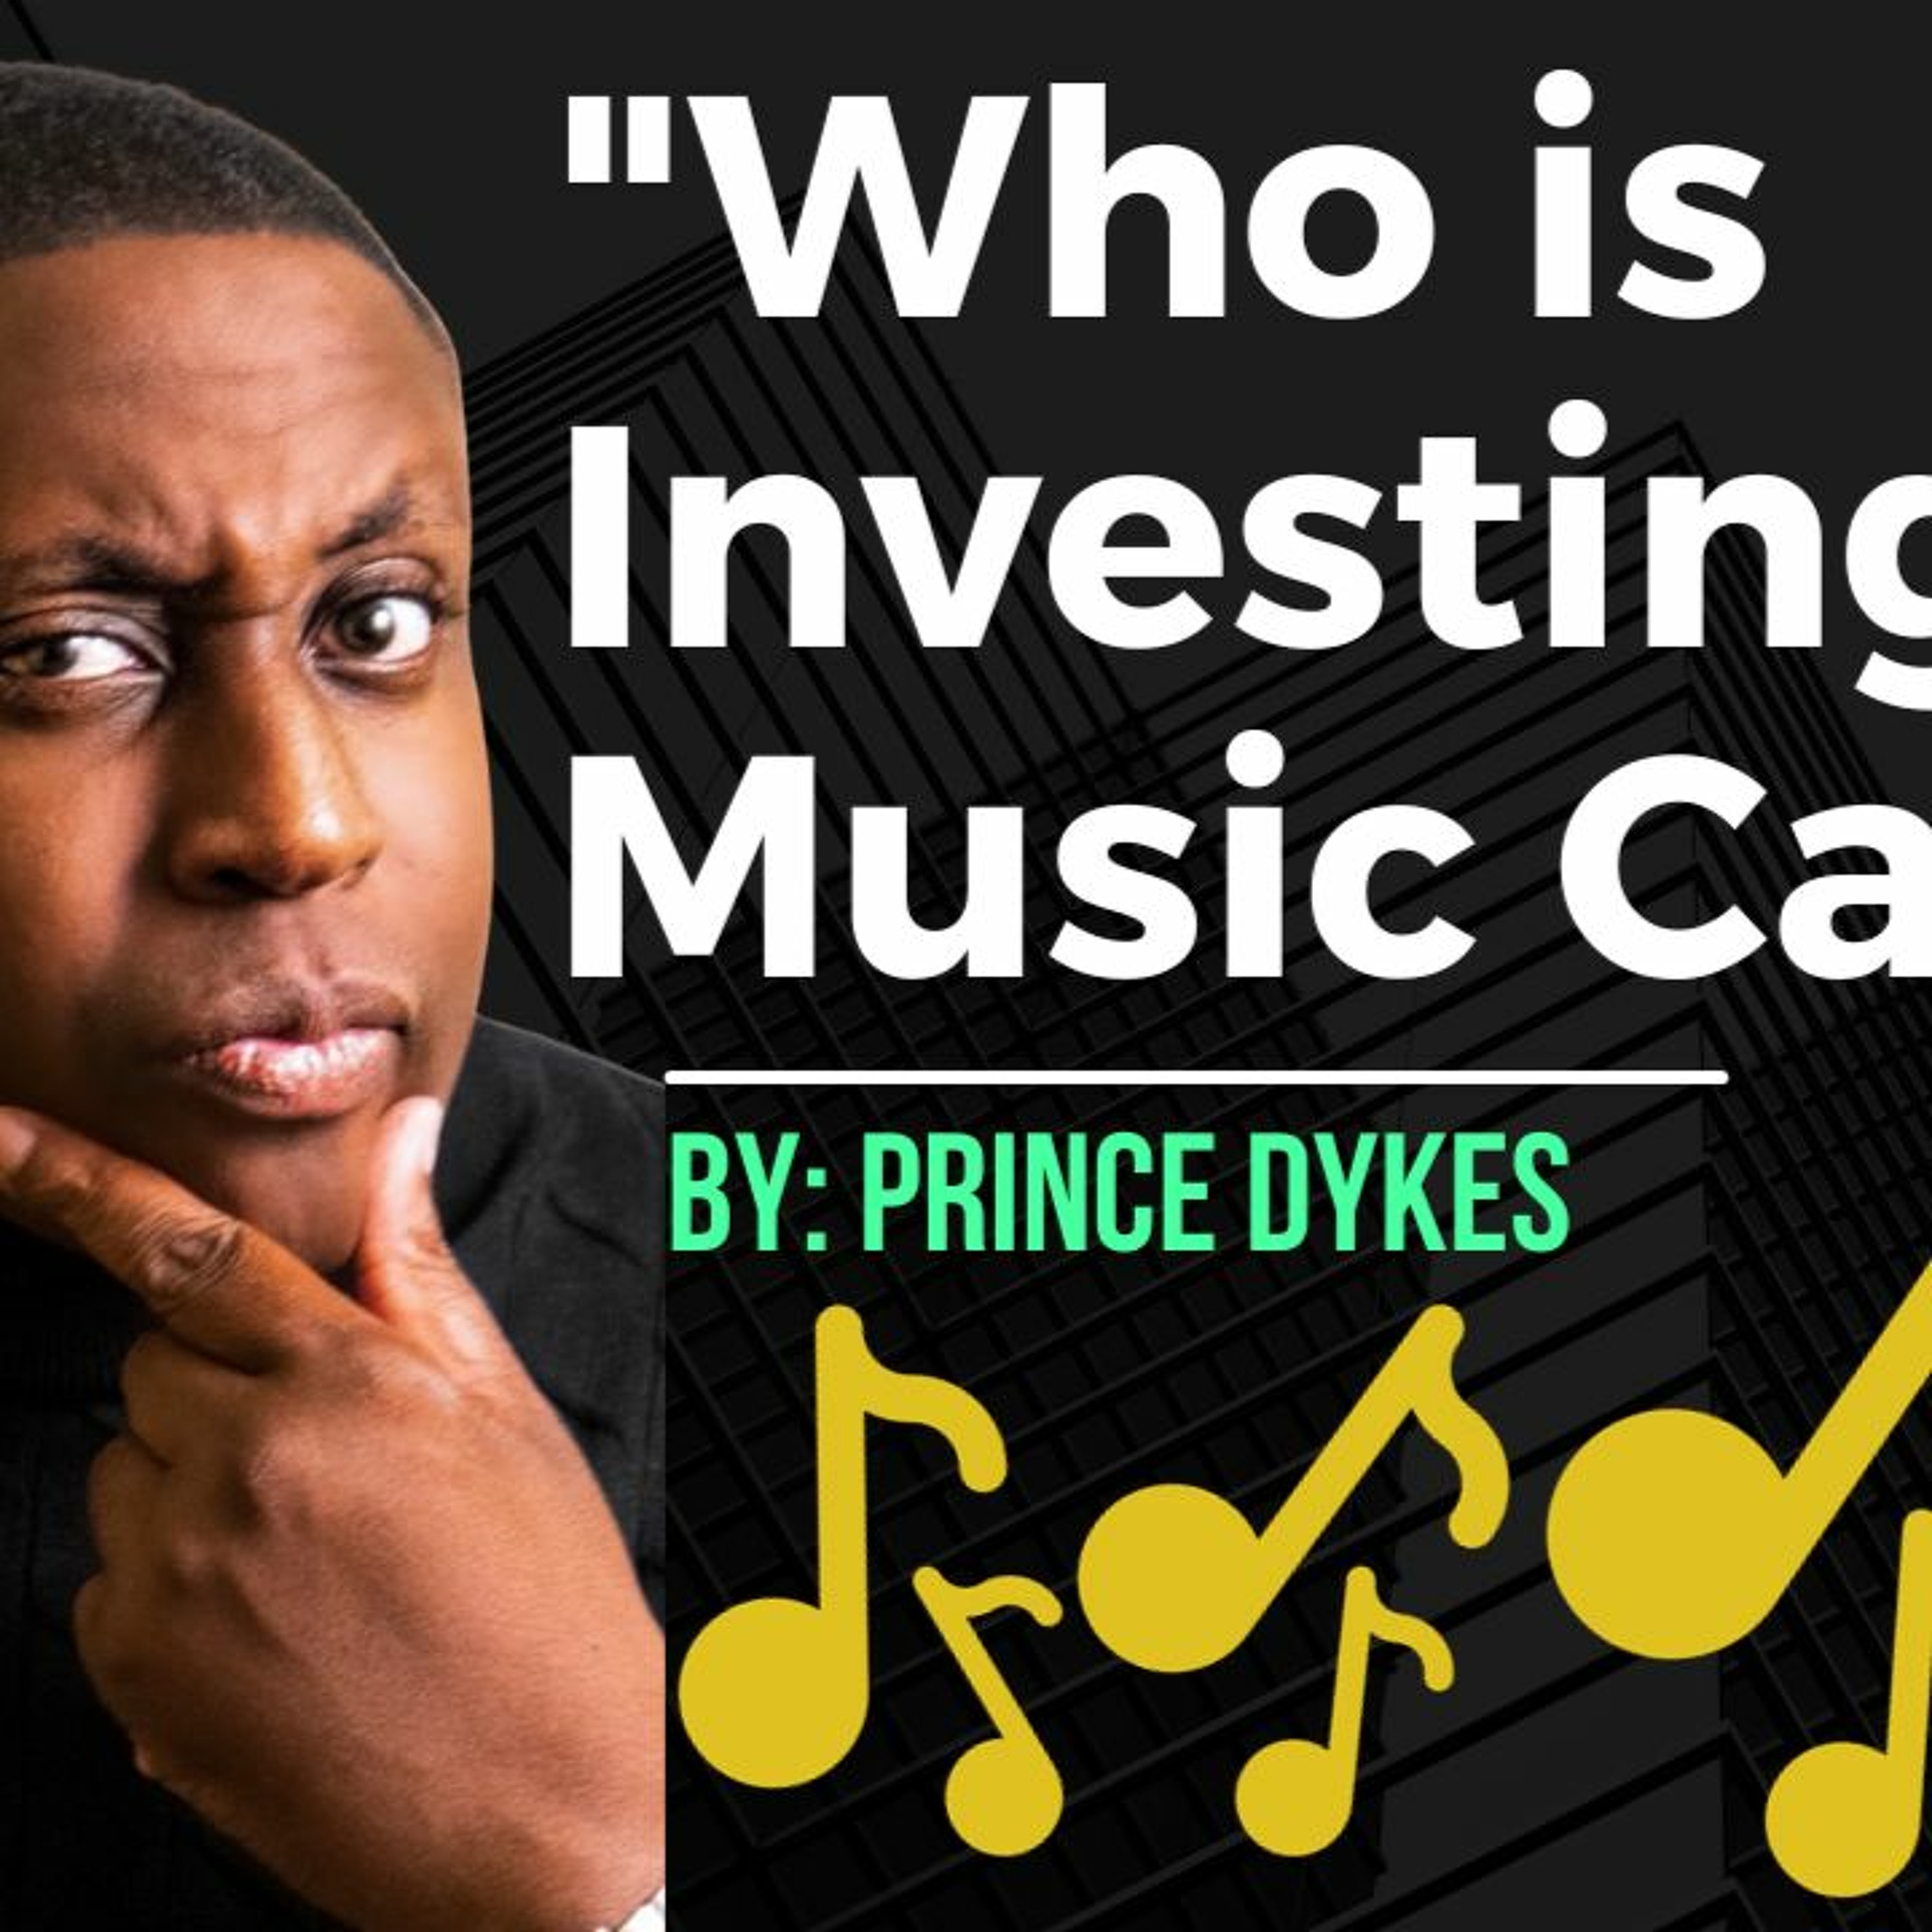 Who Is Buying Music Catalogs And How Can You Invest With Prince Dykes